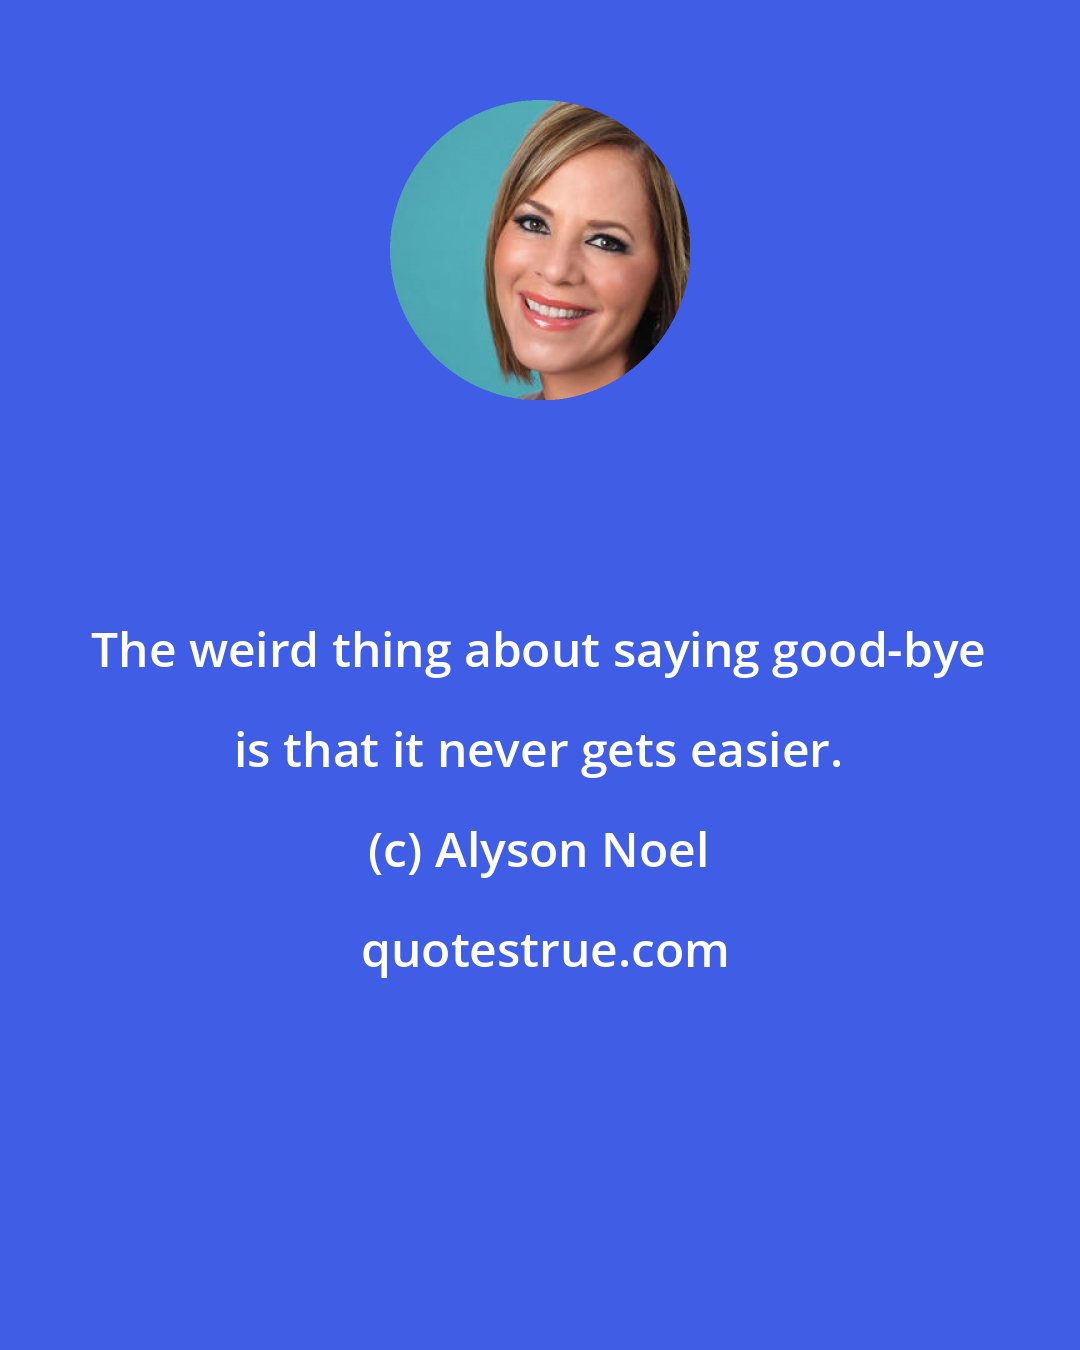 Alyson Noel: The weird thing about saying good-bye is that it never gets easier.